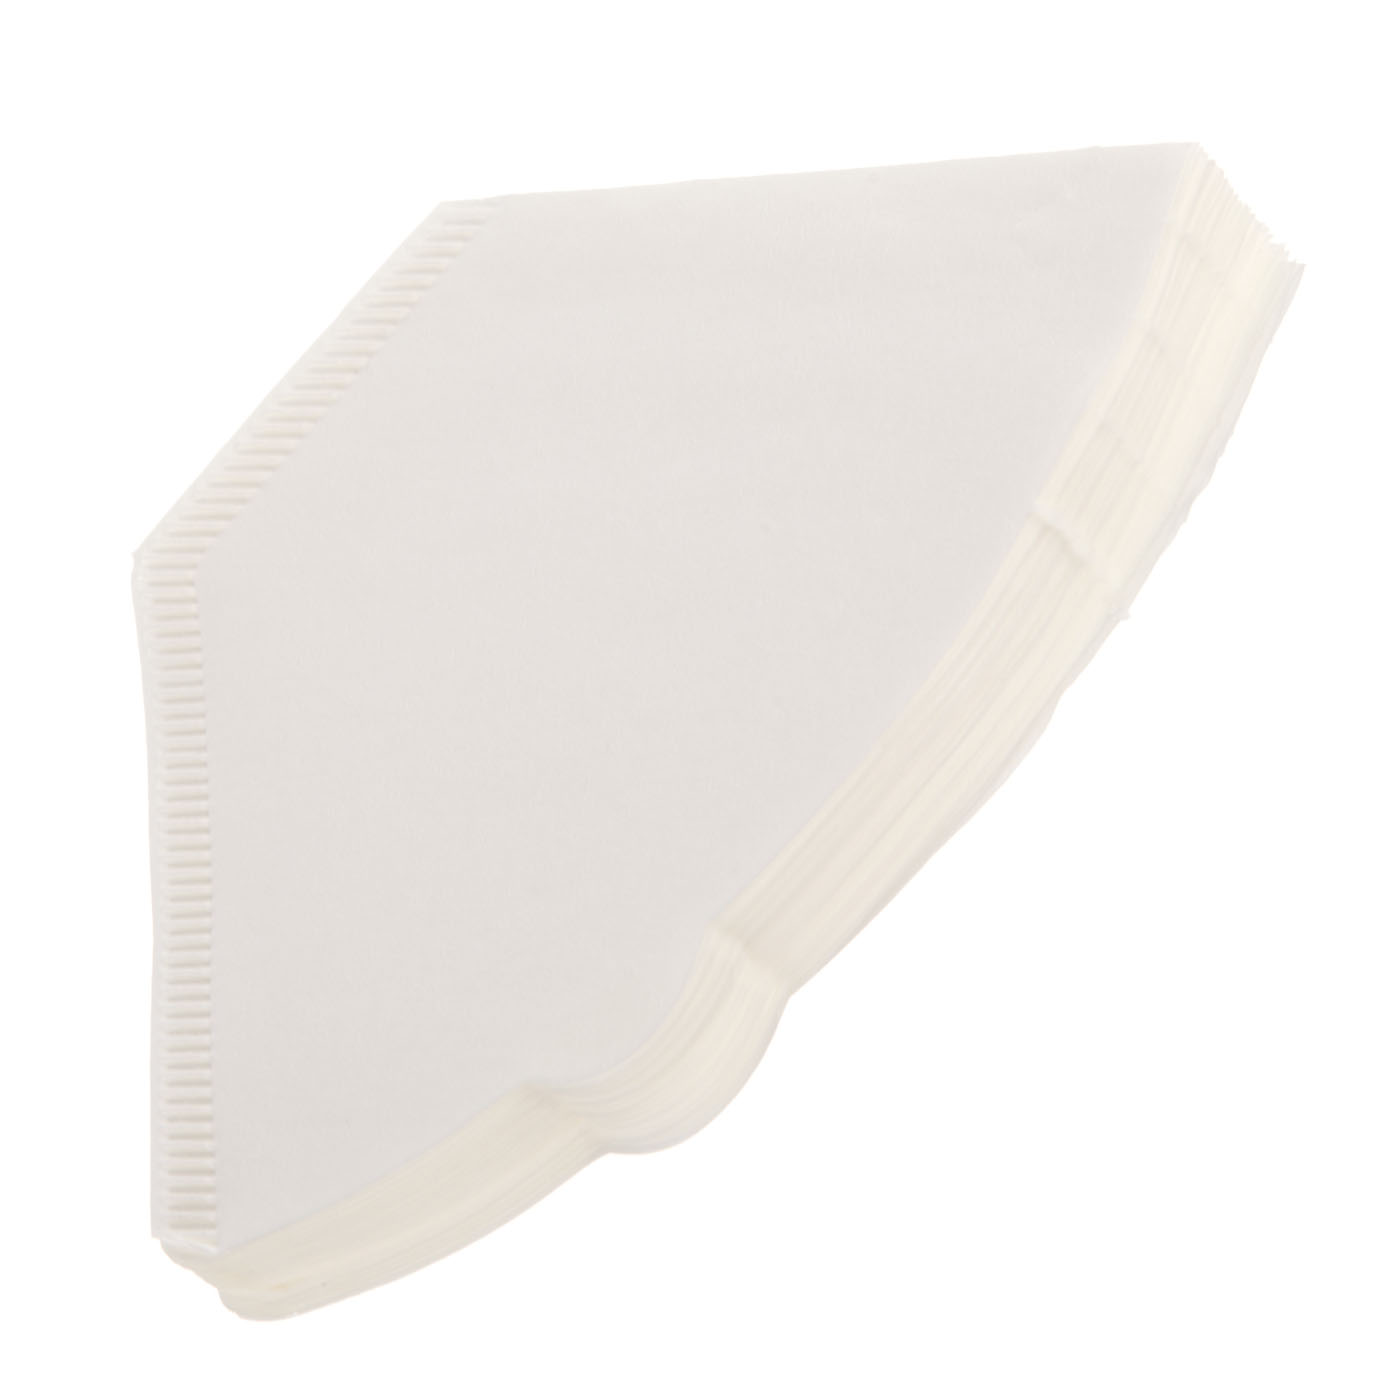 Filtra Coffee Filter Papers Size 2 (1x2)